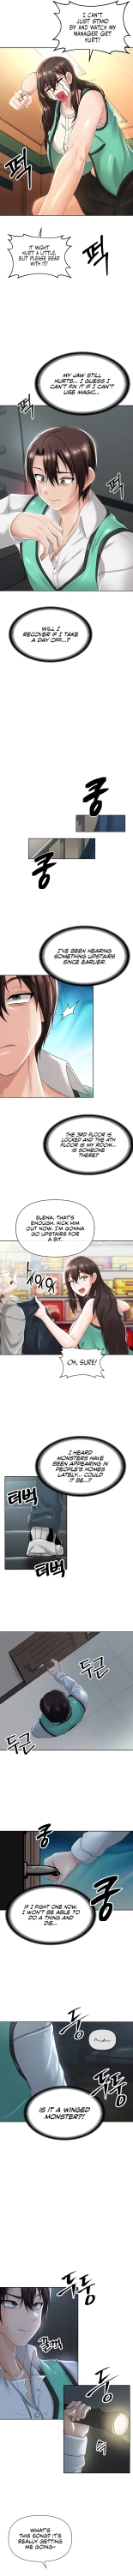 Welcome to the Isekai Convenience Store : página 79